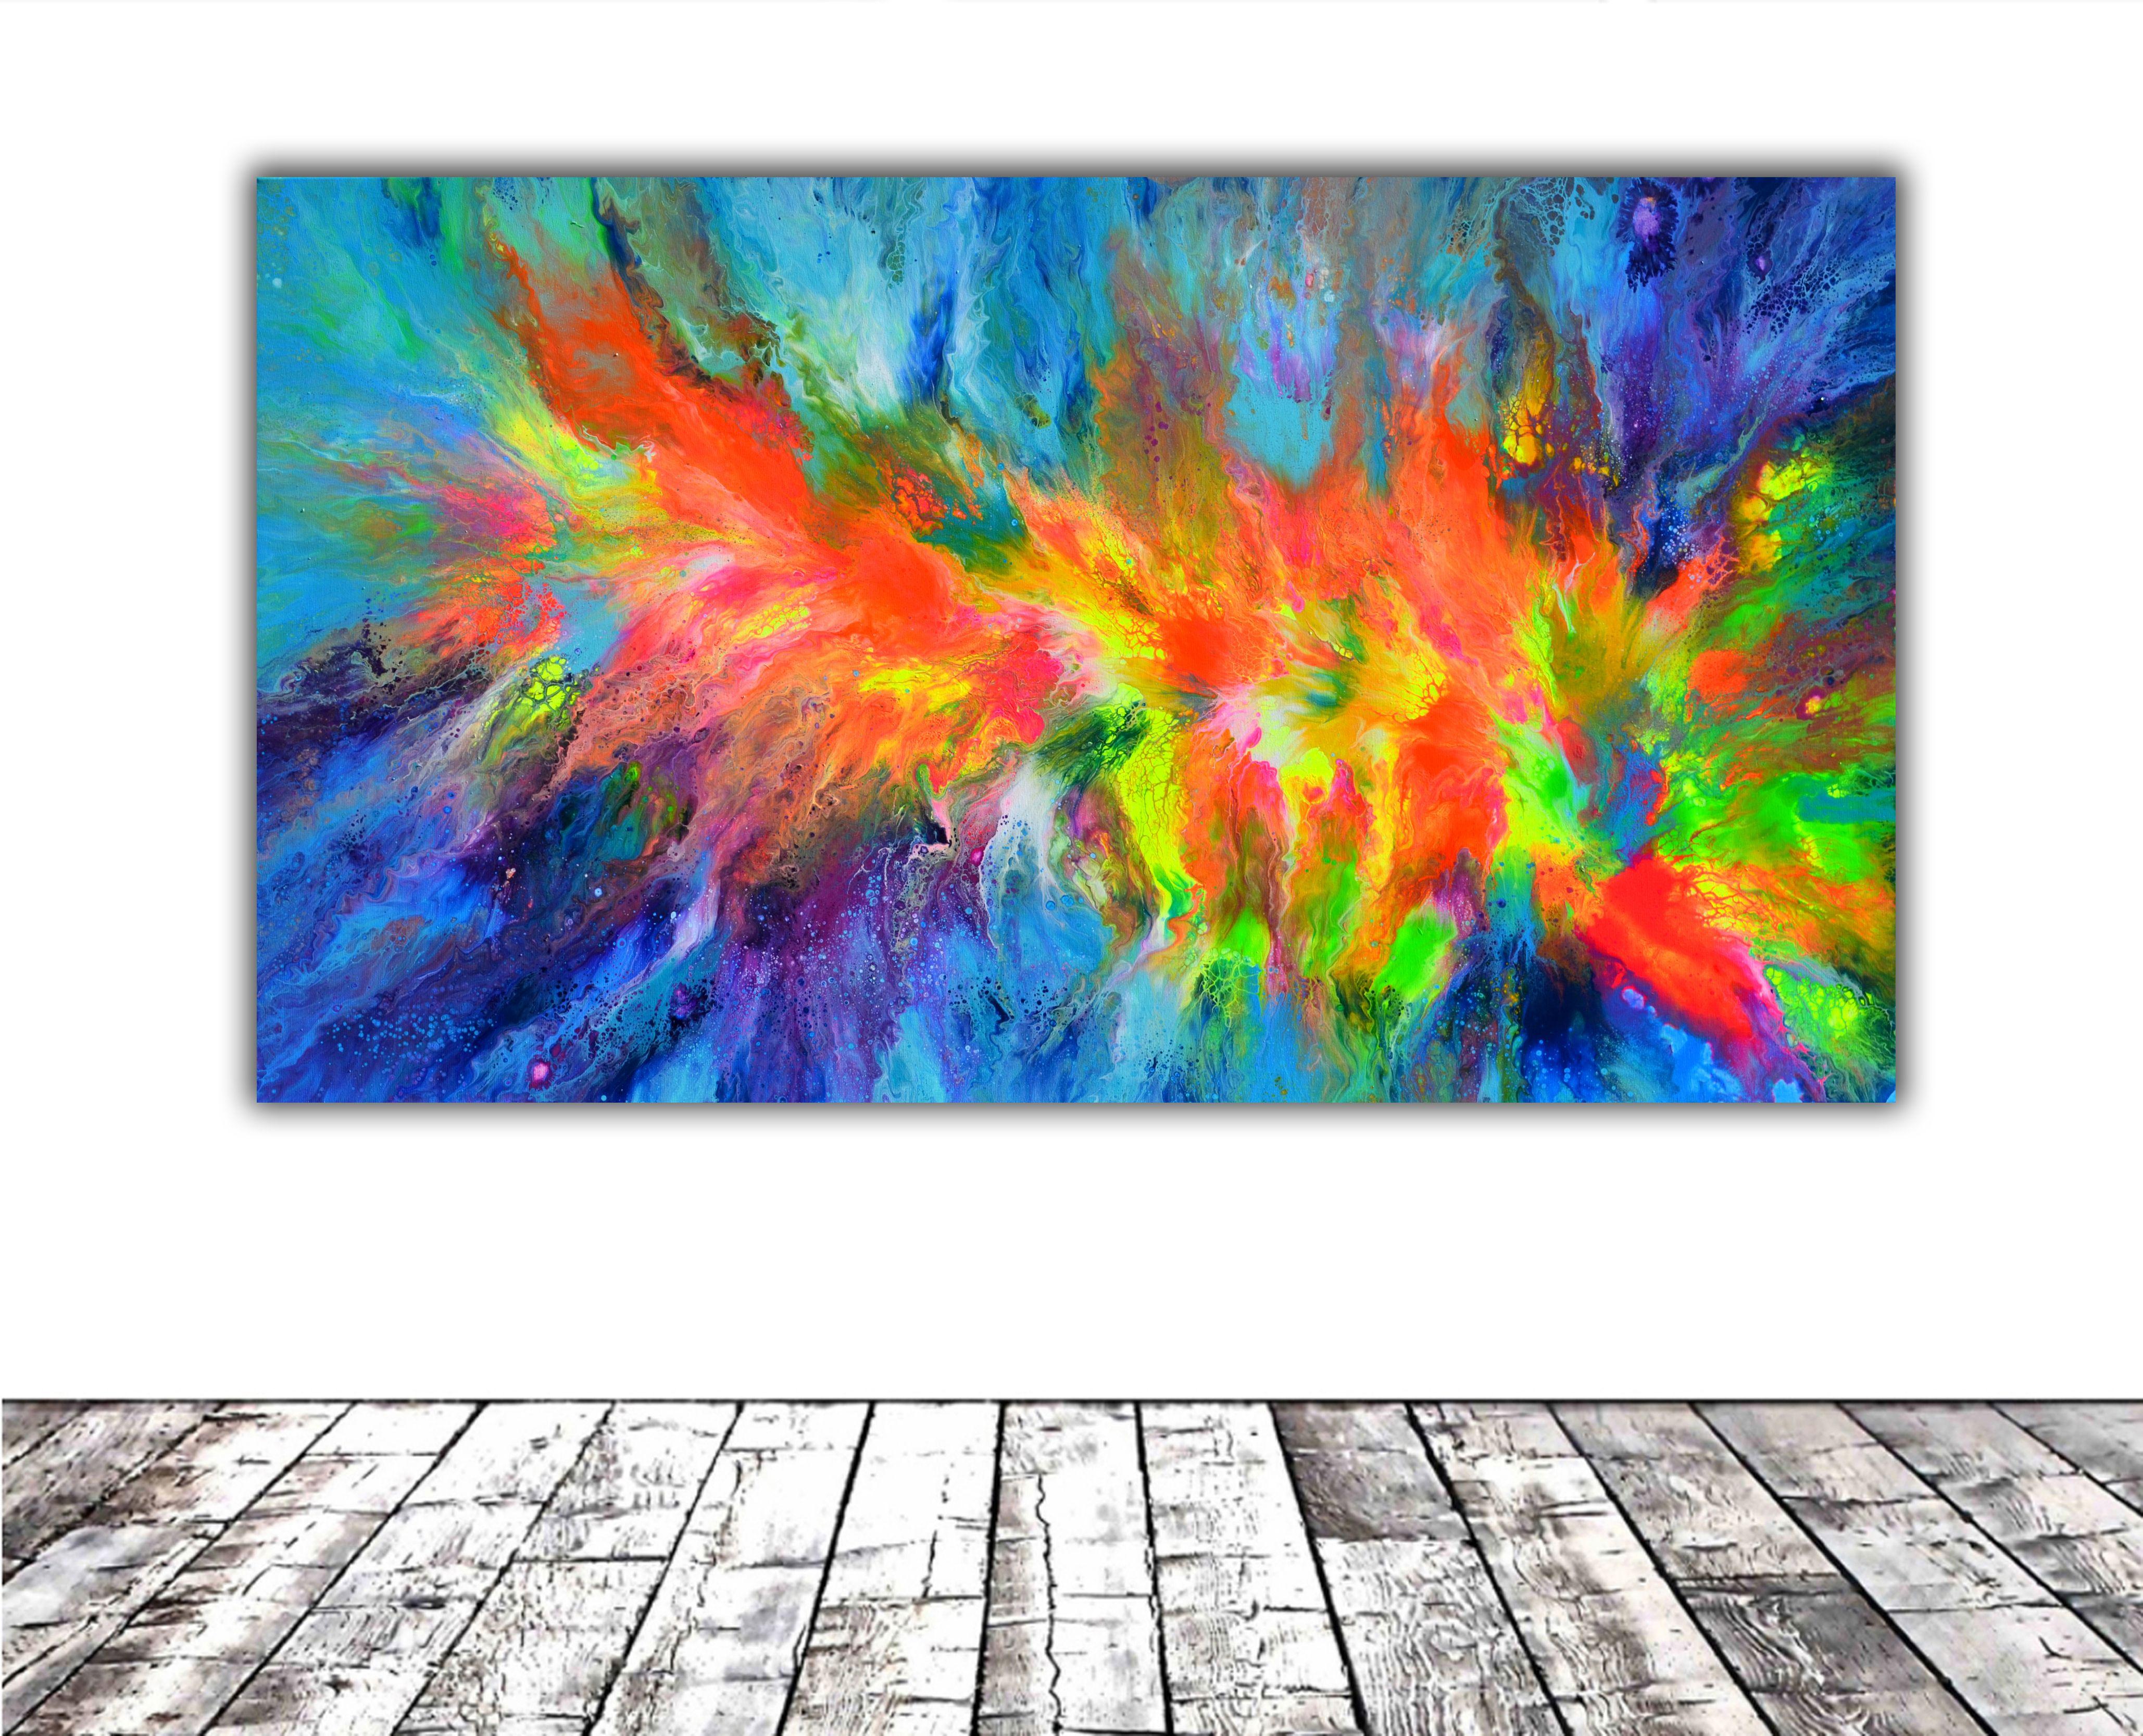 Ready to hang with the edges painted - 3D GALLERY QUALITY  Size: 140x80X4 cm, 55.12x31.5x1.6 inches.  A very colourful piece of art, as a focal point it will bring a large space to life. Some colours could not be caught by the camera.  Will be